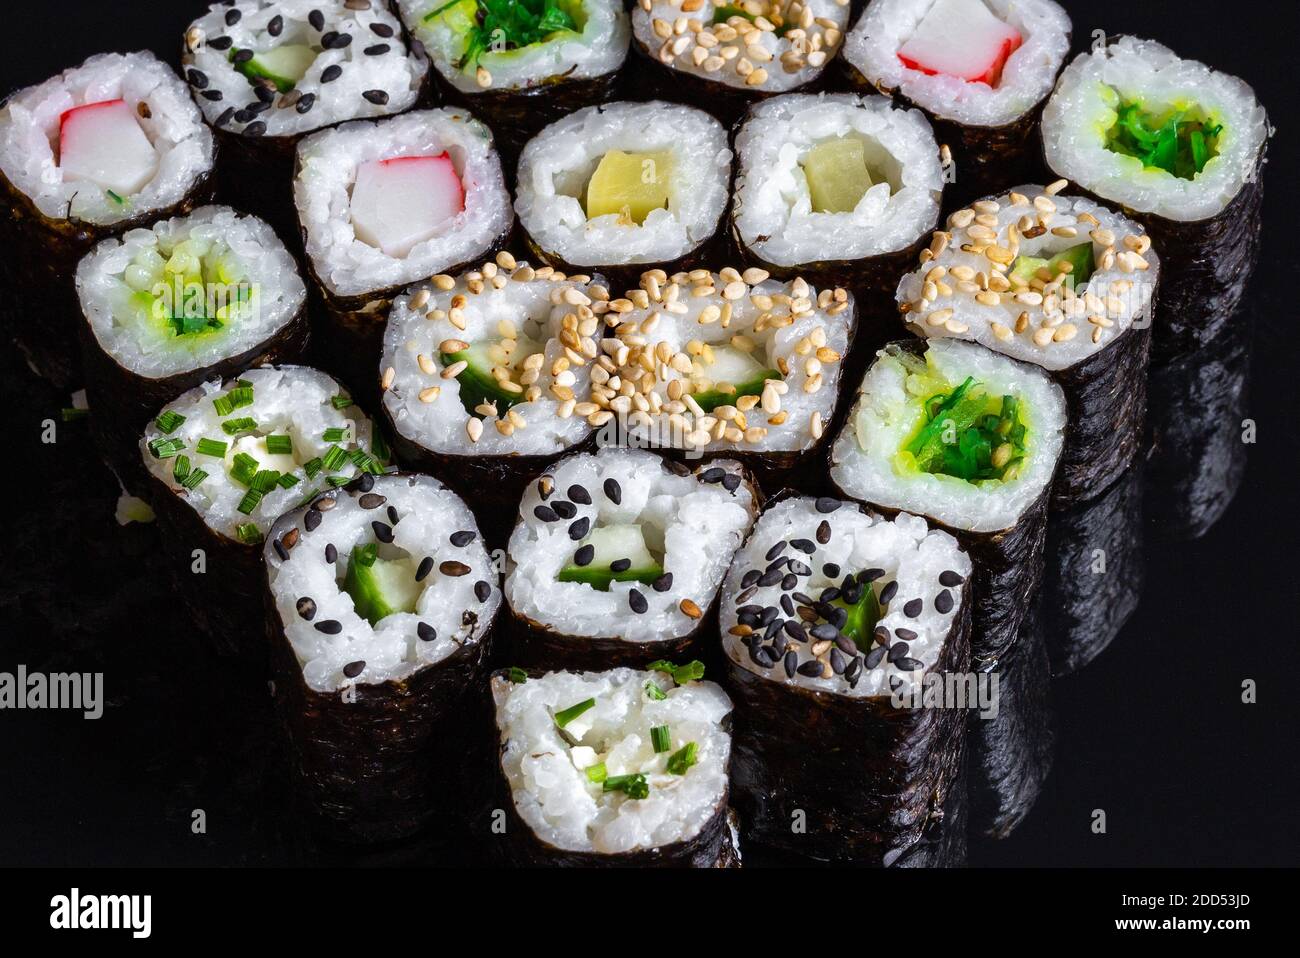 Sushi on a black background with the reflection. Macro photography Stock Photo